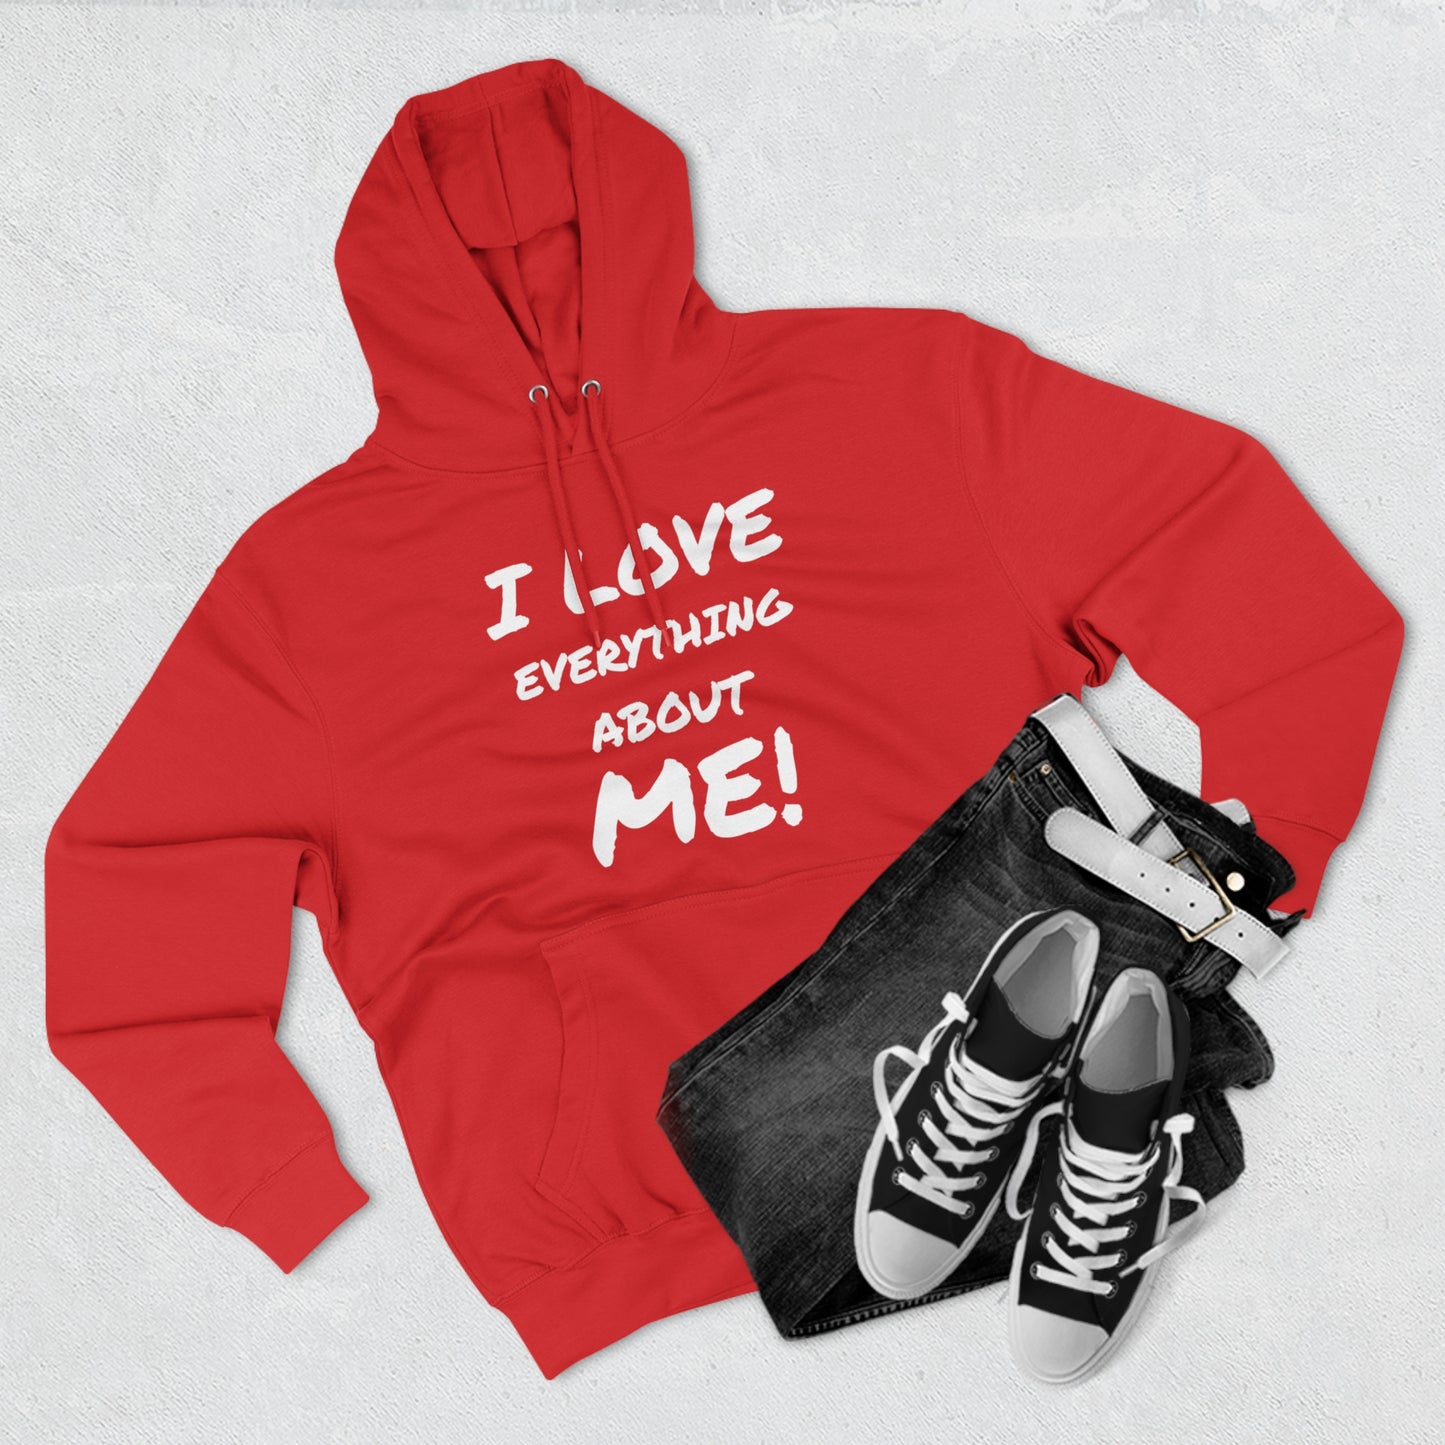 I LOVE EVERYTHING ABOUT ME Unisex Premium Pullover Hoodie